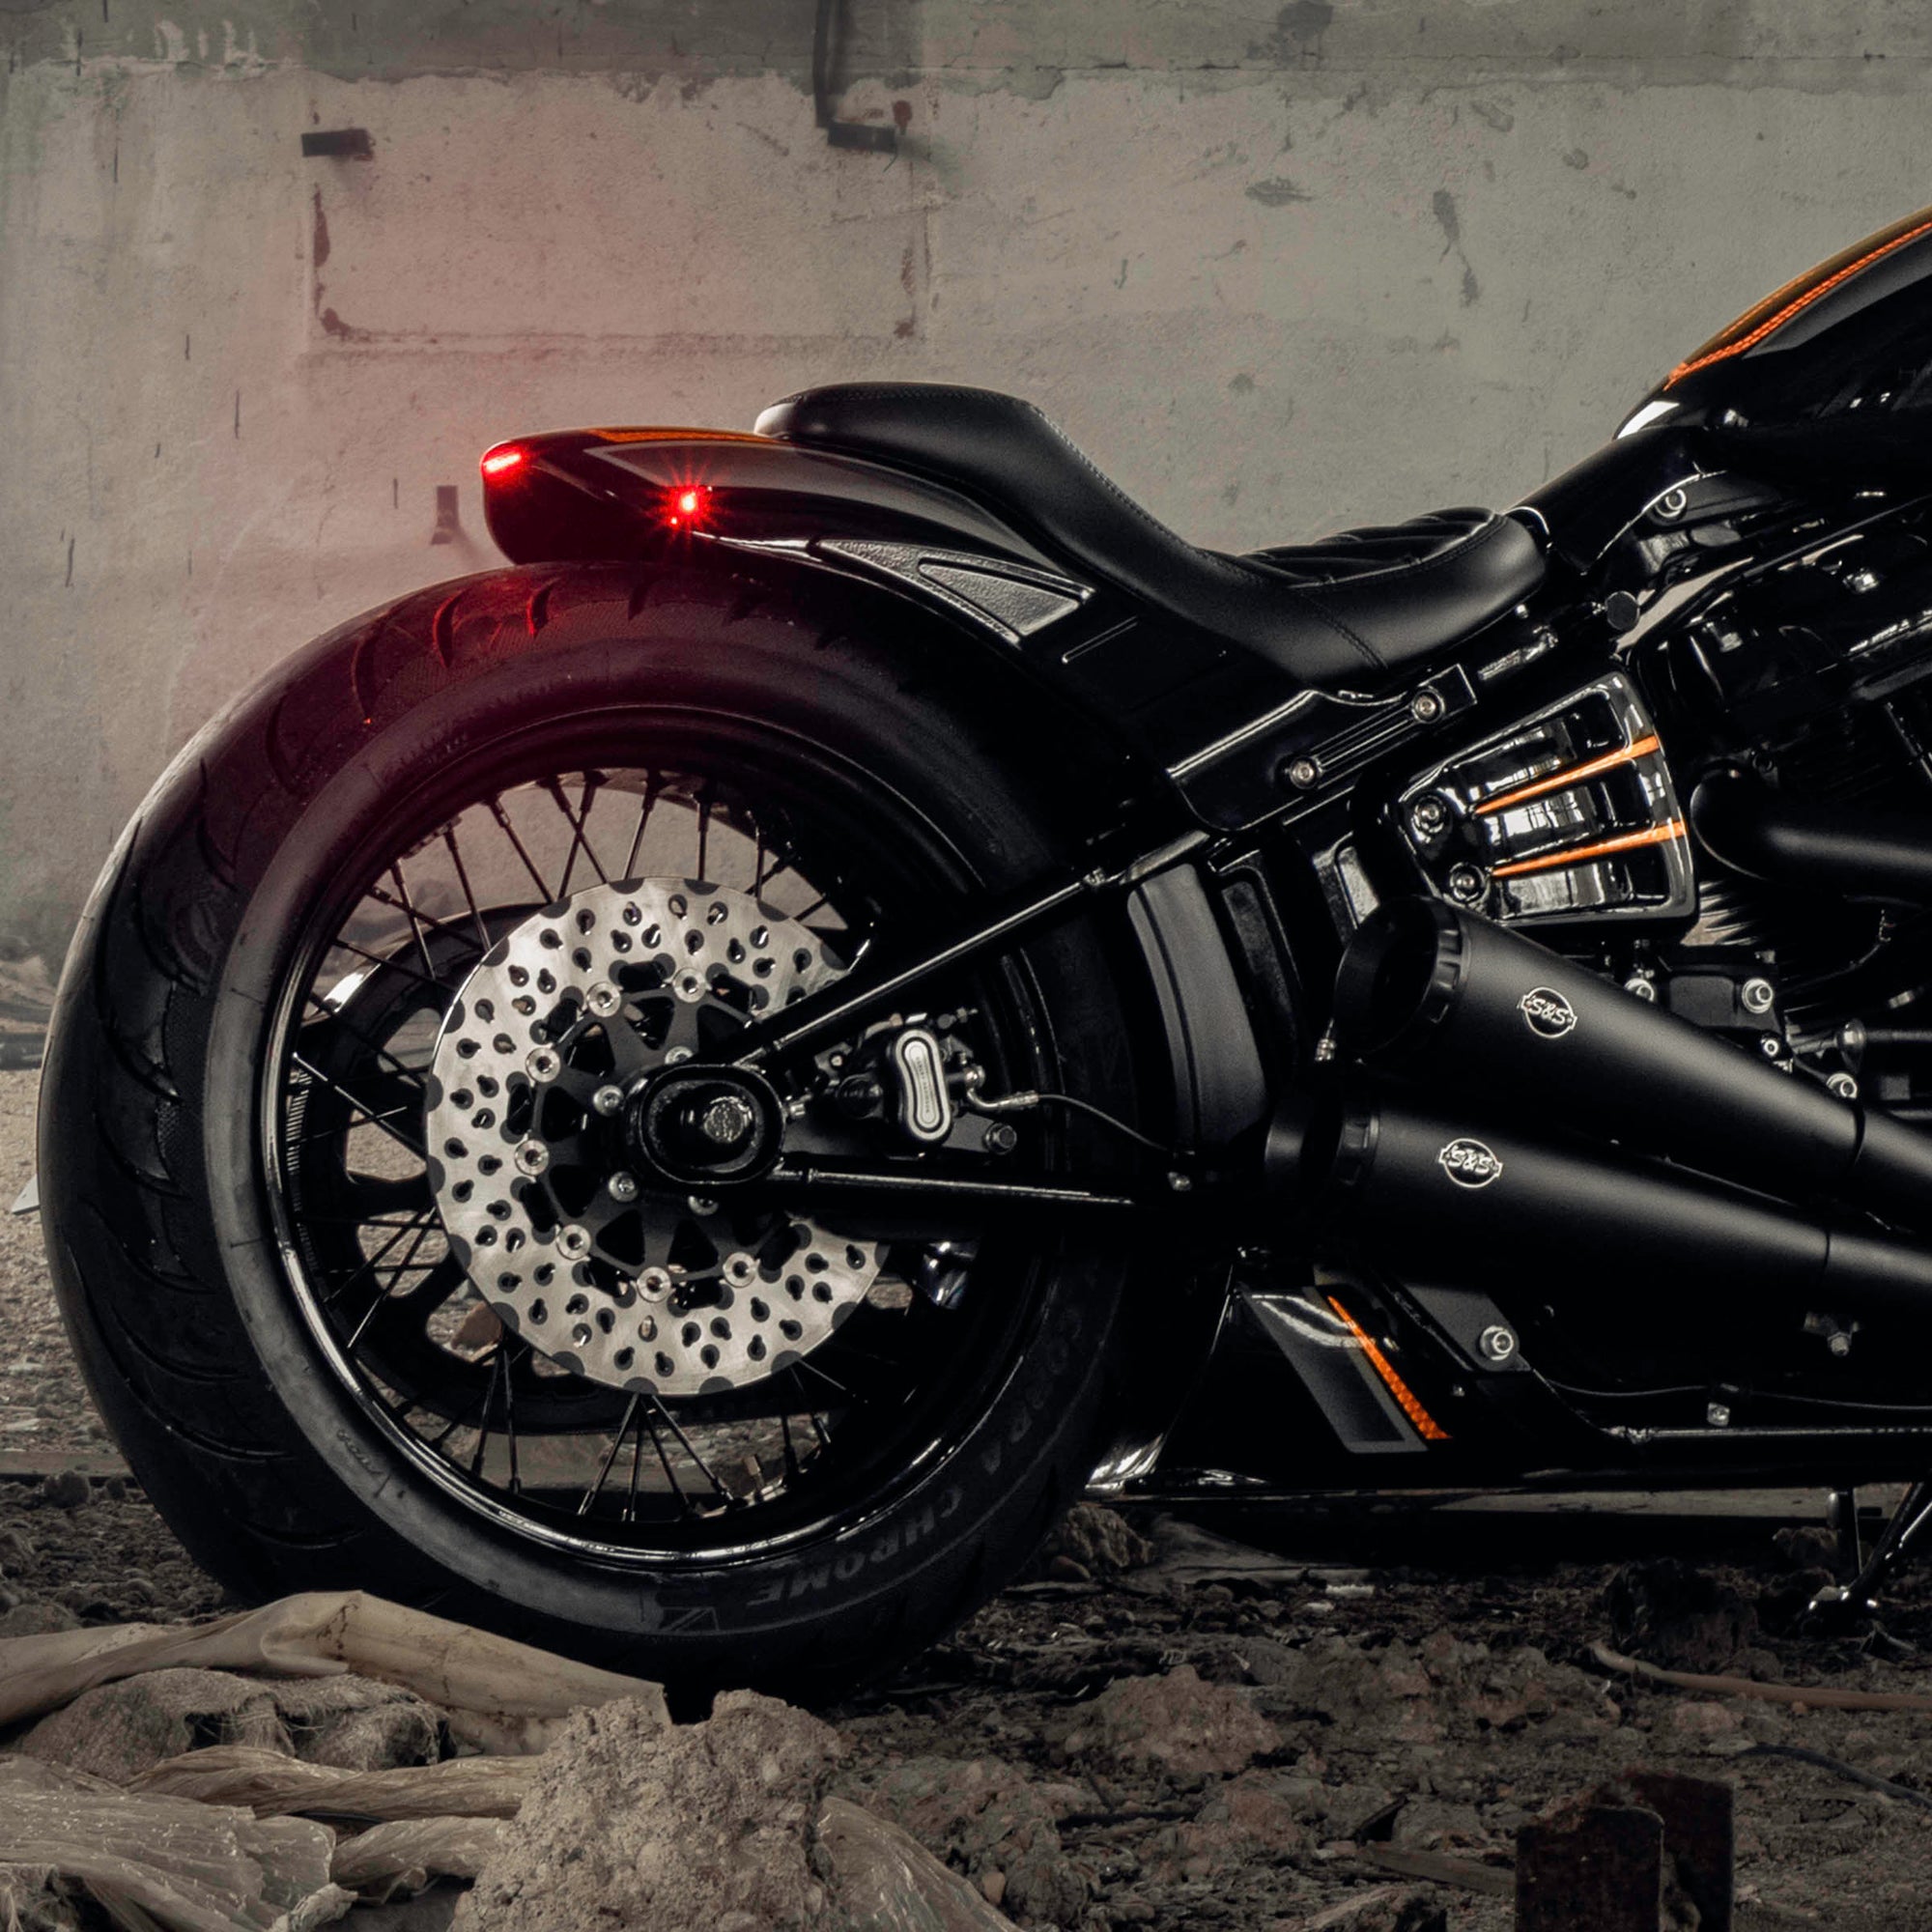 Zoomed Harley Davidson motorcycle with Killer Custom parts from the side in an abandoned building